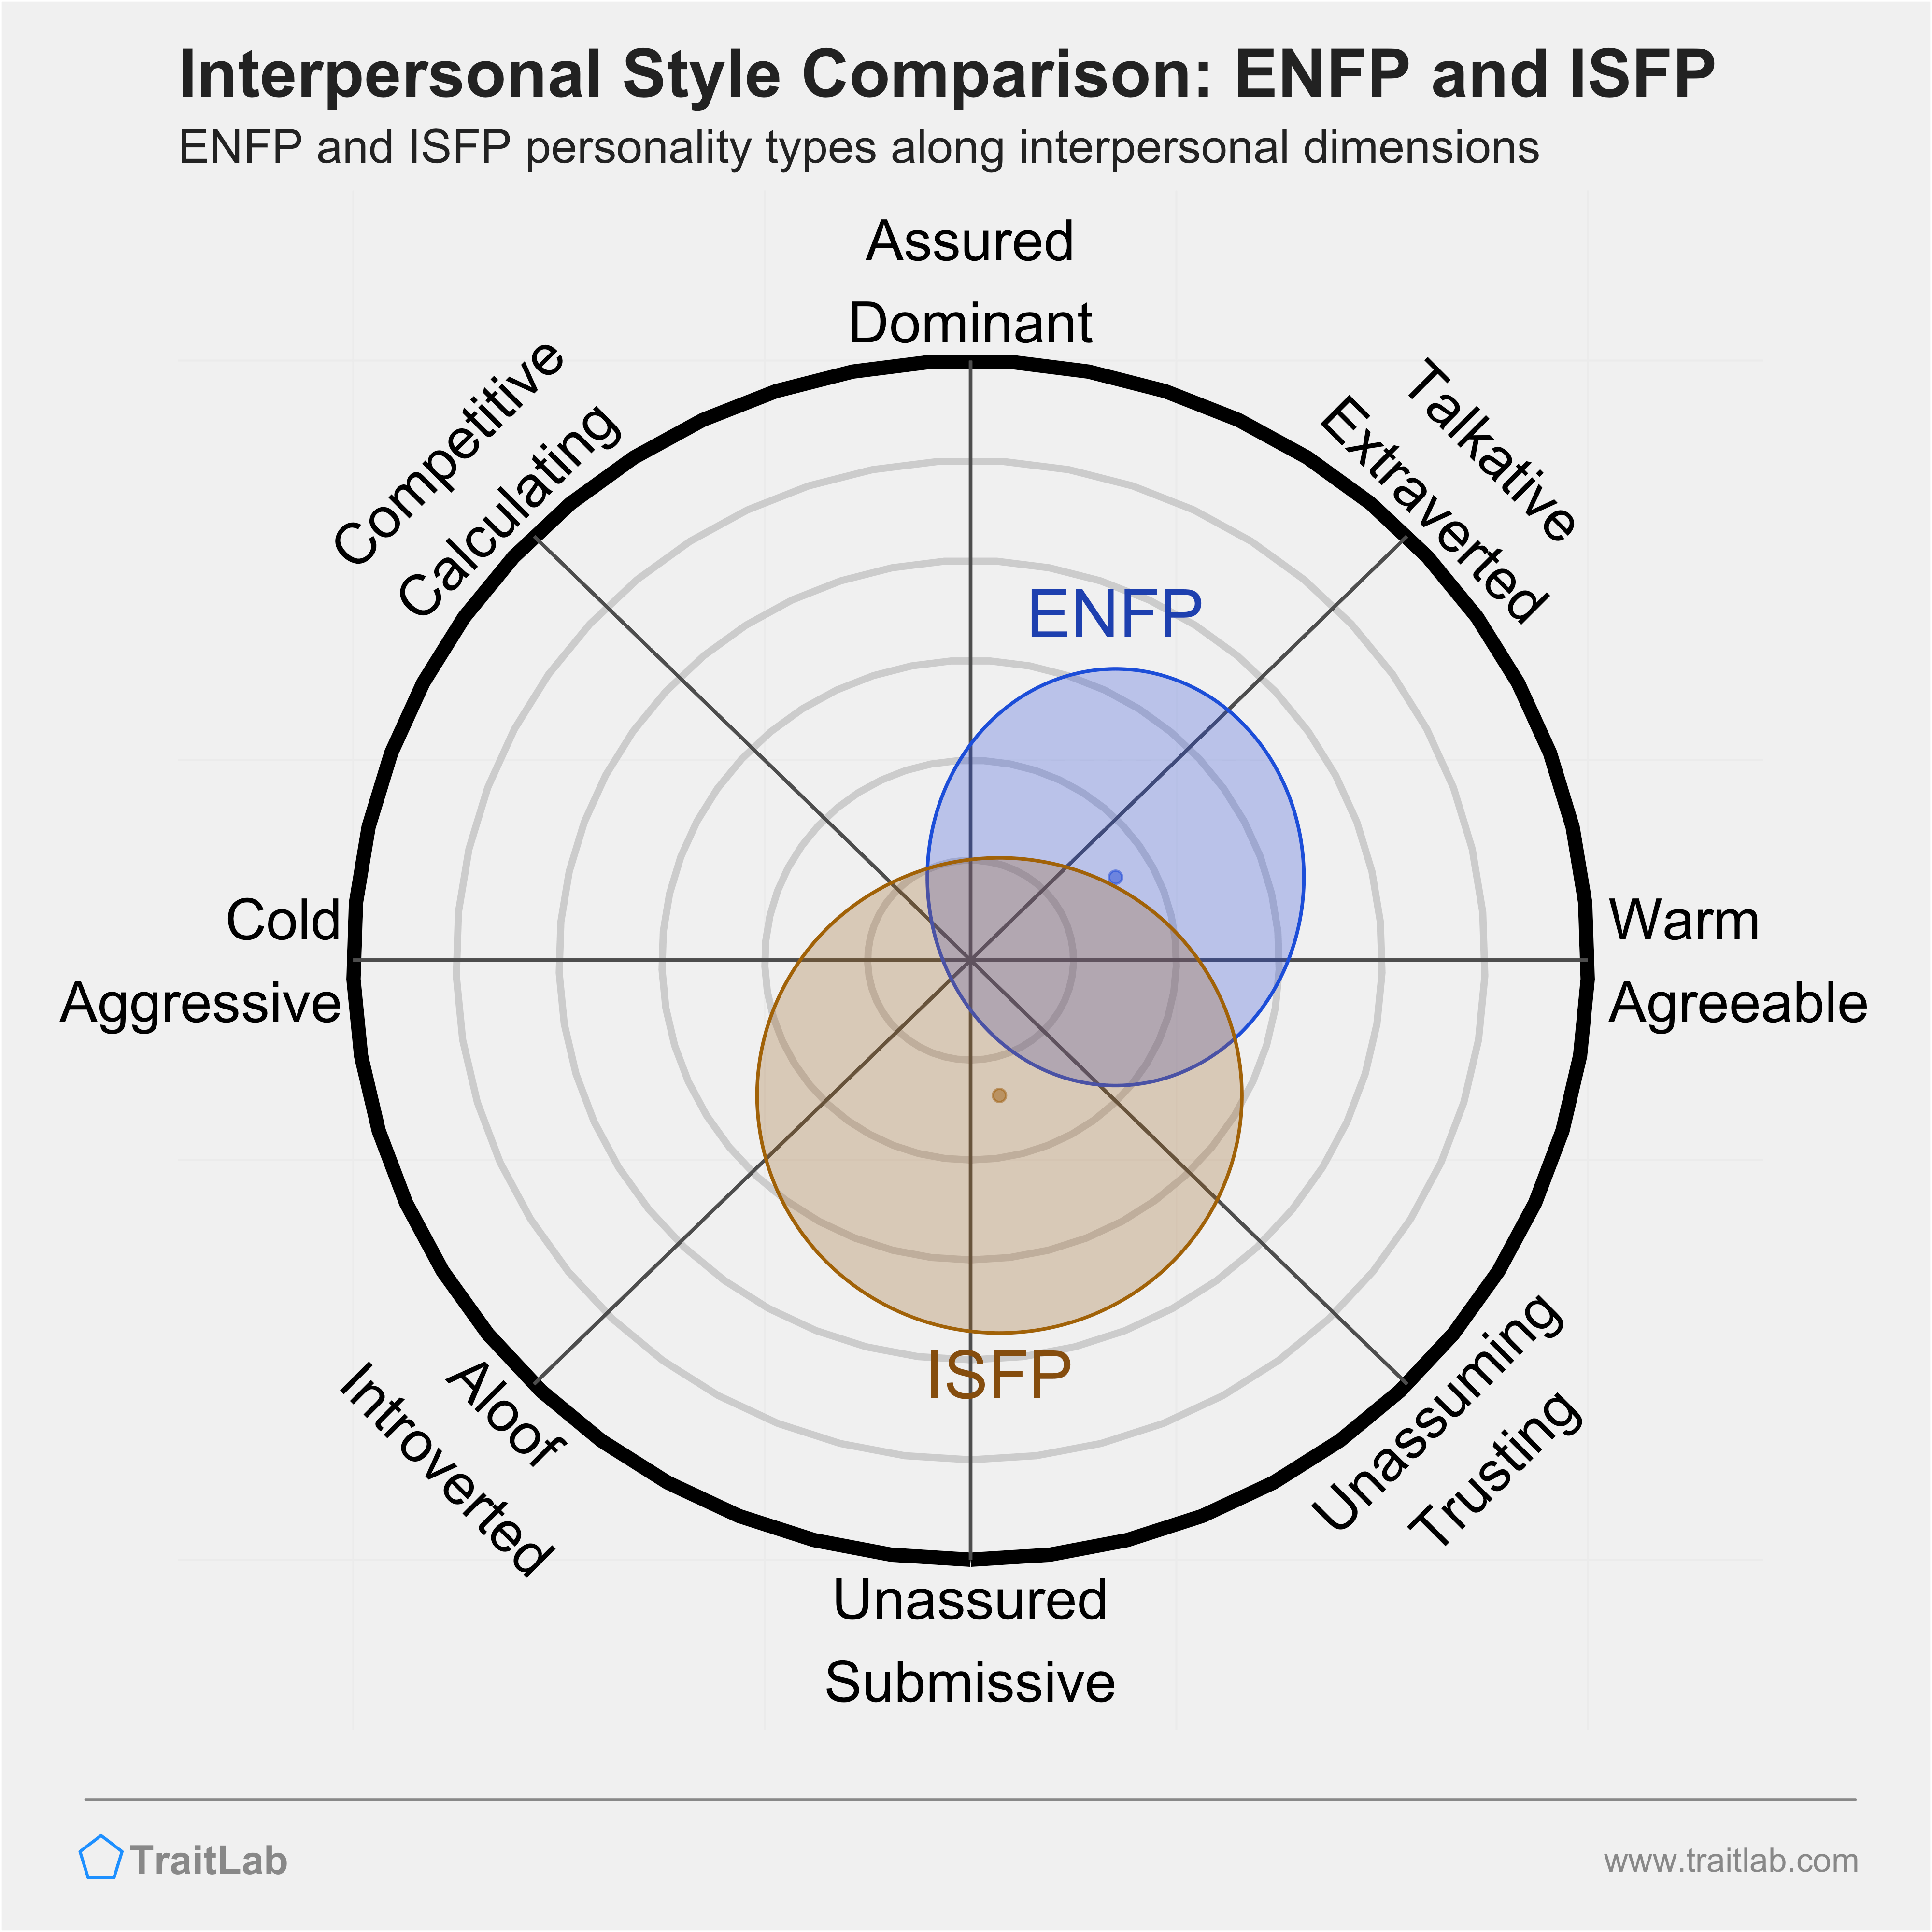 ENFP and ISFP comparison across interpersonal dimensions